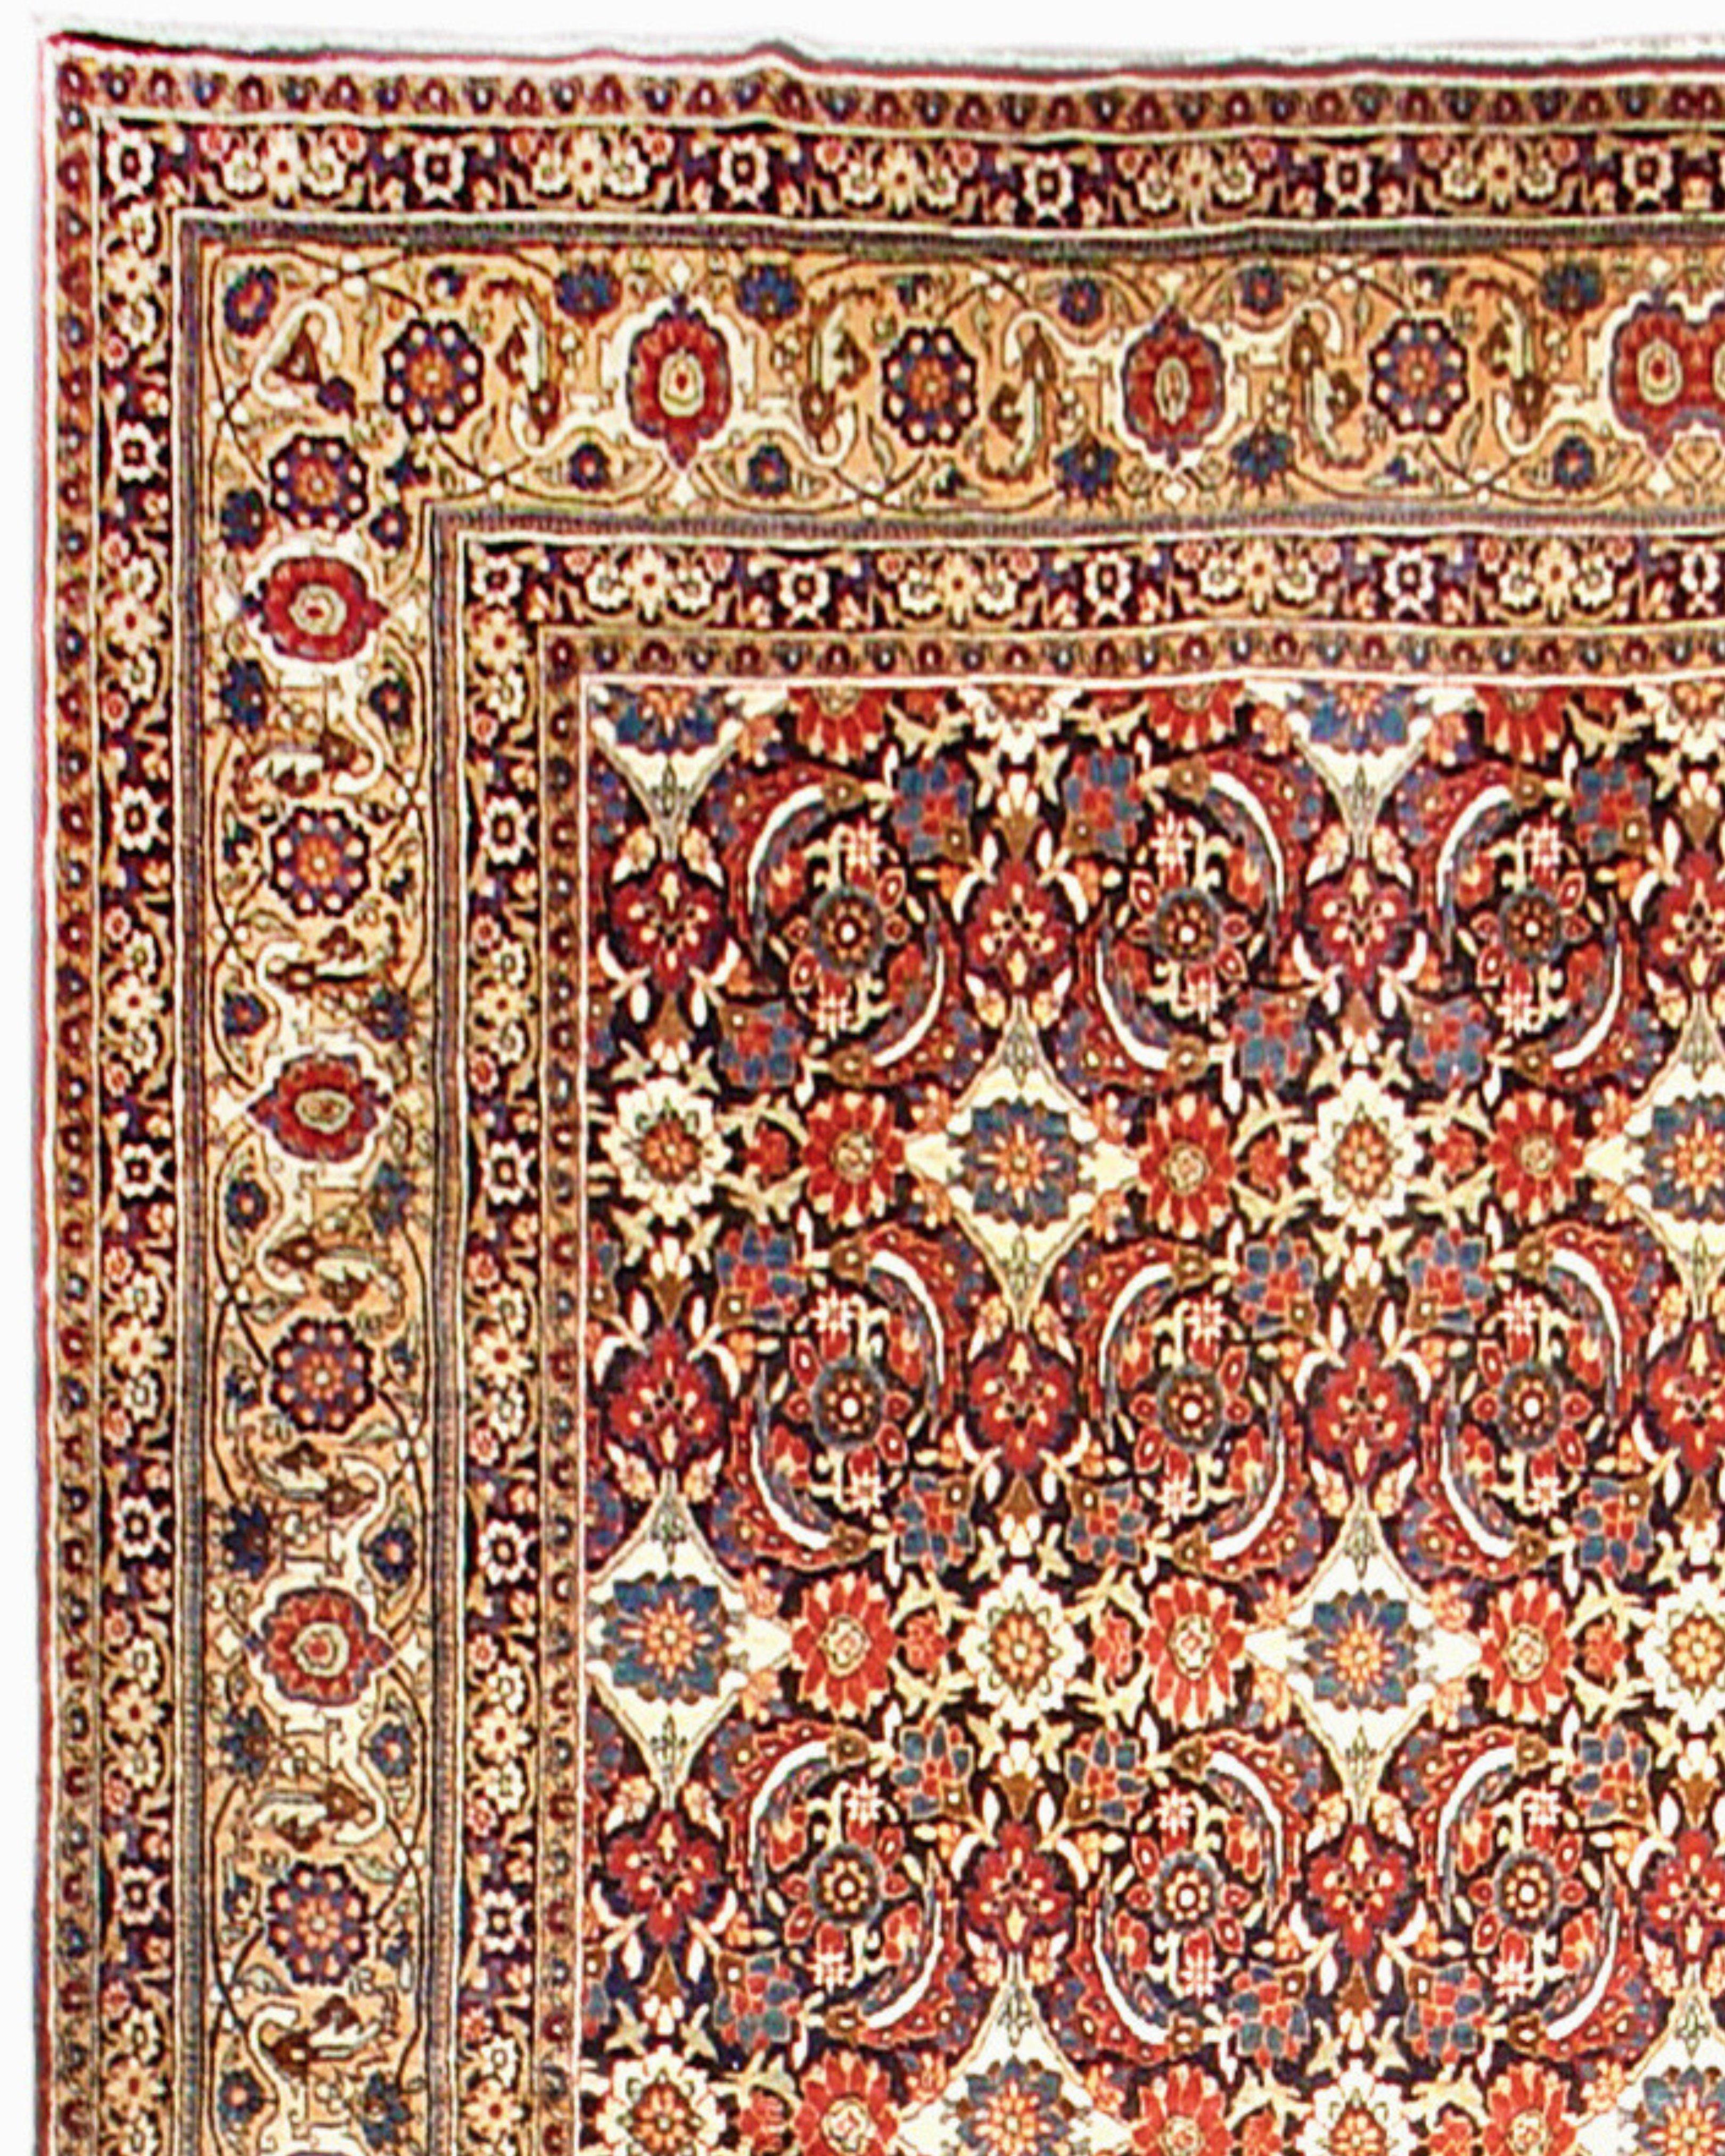 Hand-Knotted Antique Persian Yezd Carpet, c. 1900 For Sale